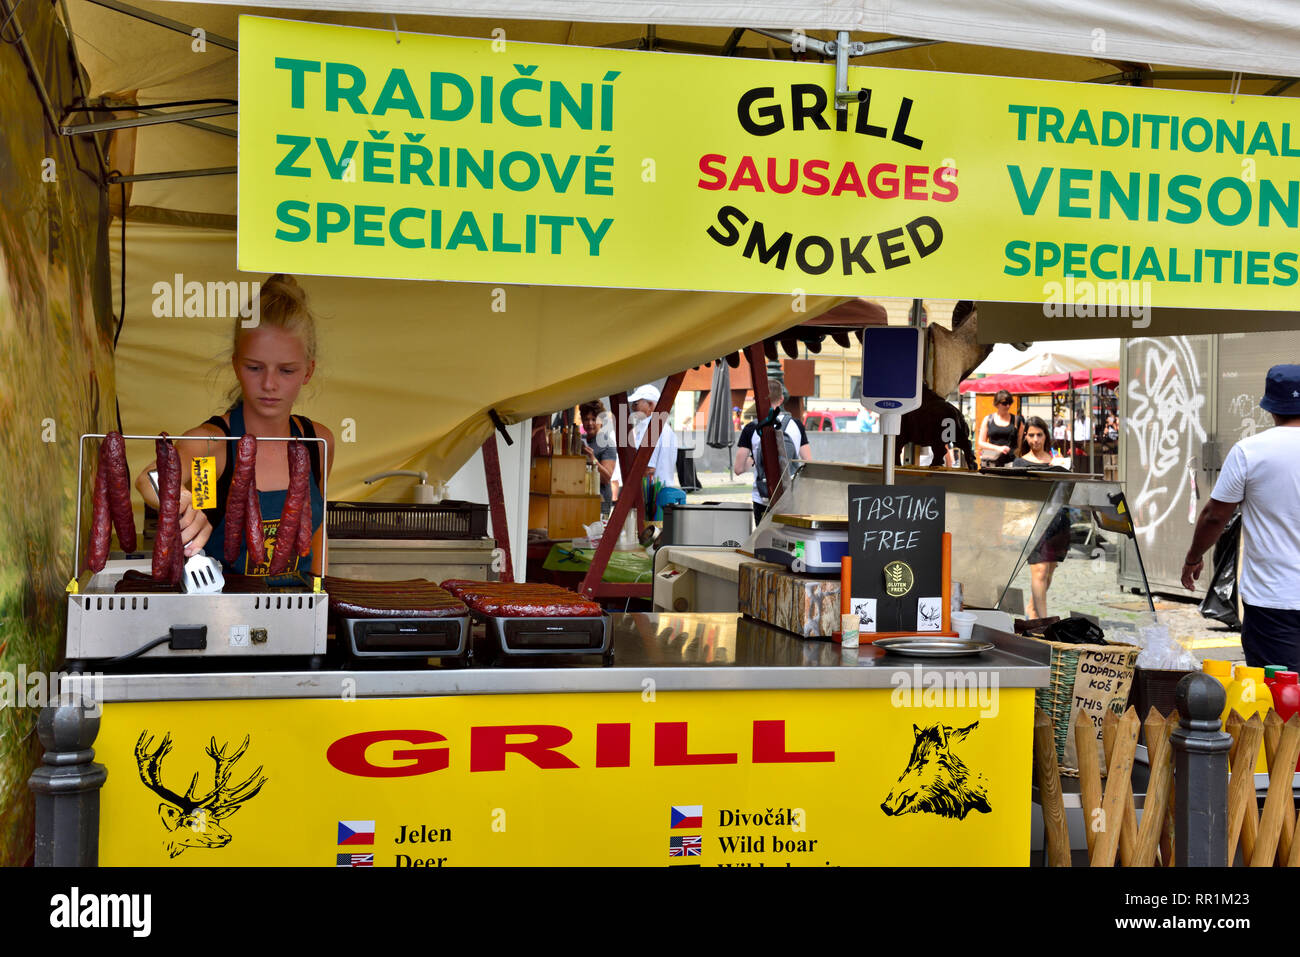 Young woman stallholder selling traditional grilled venison sausages at Farmers Market, Prague, Czech Republic Stock Photo